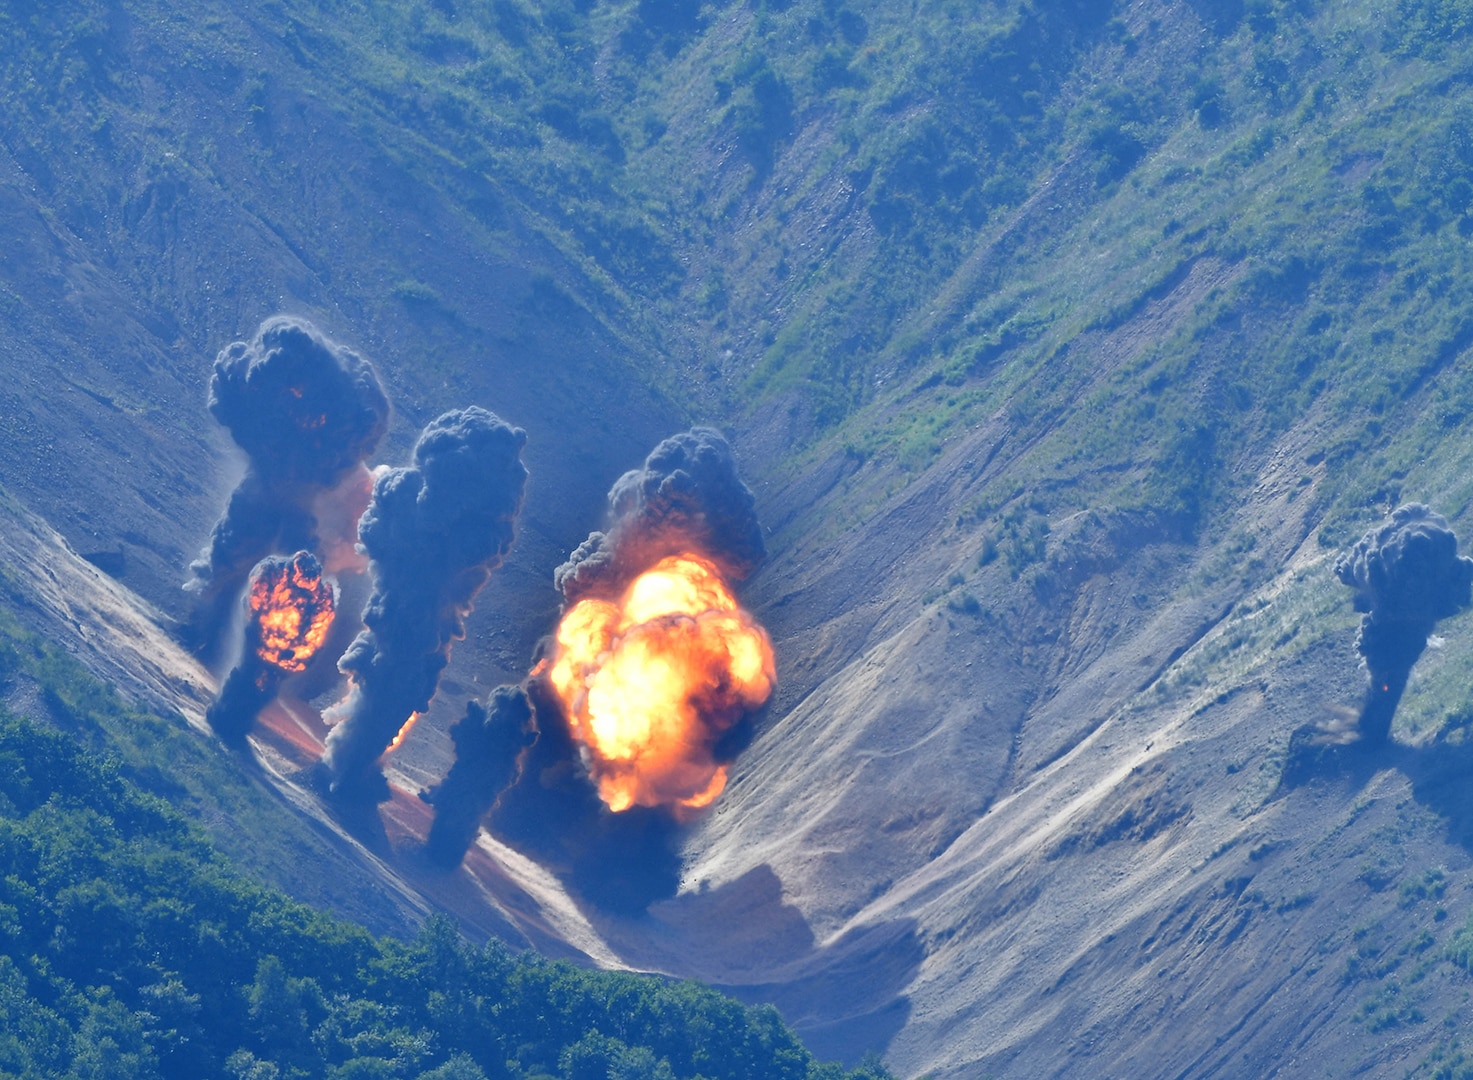 Weapons dropped from F-35Bs and B-1Bs strike the Pilsung Range in South Korea during a live-fire training mission